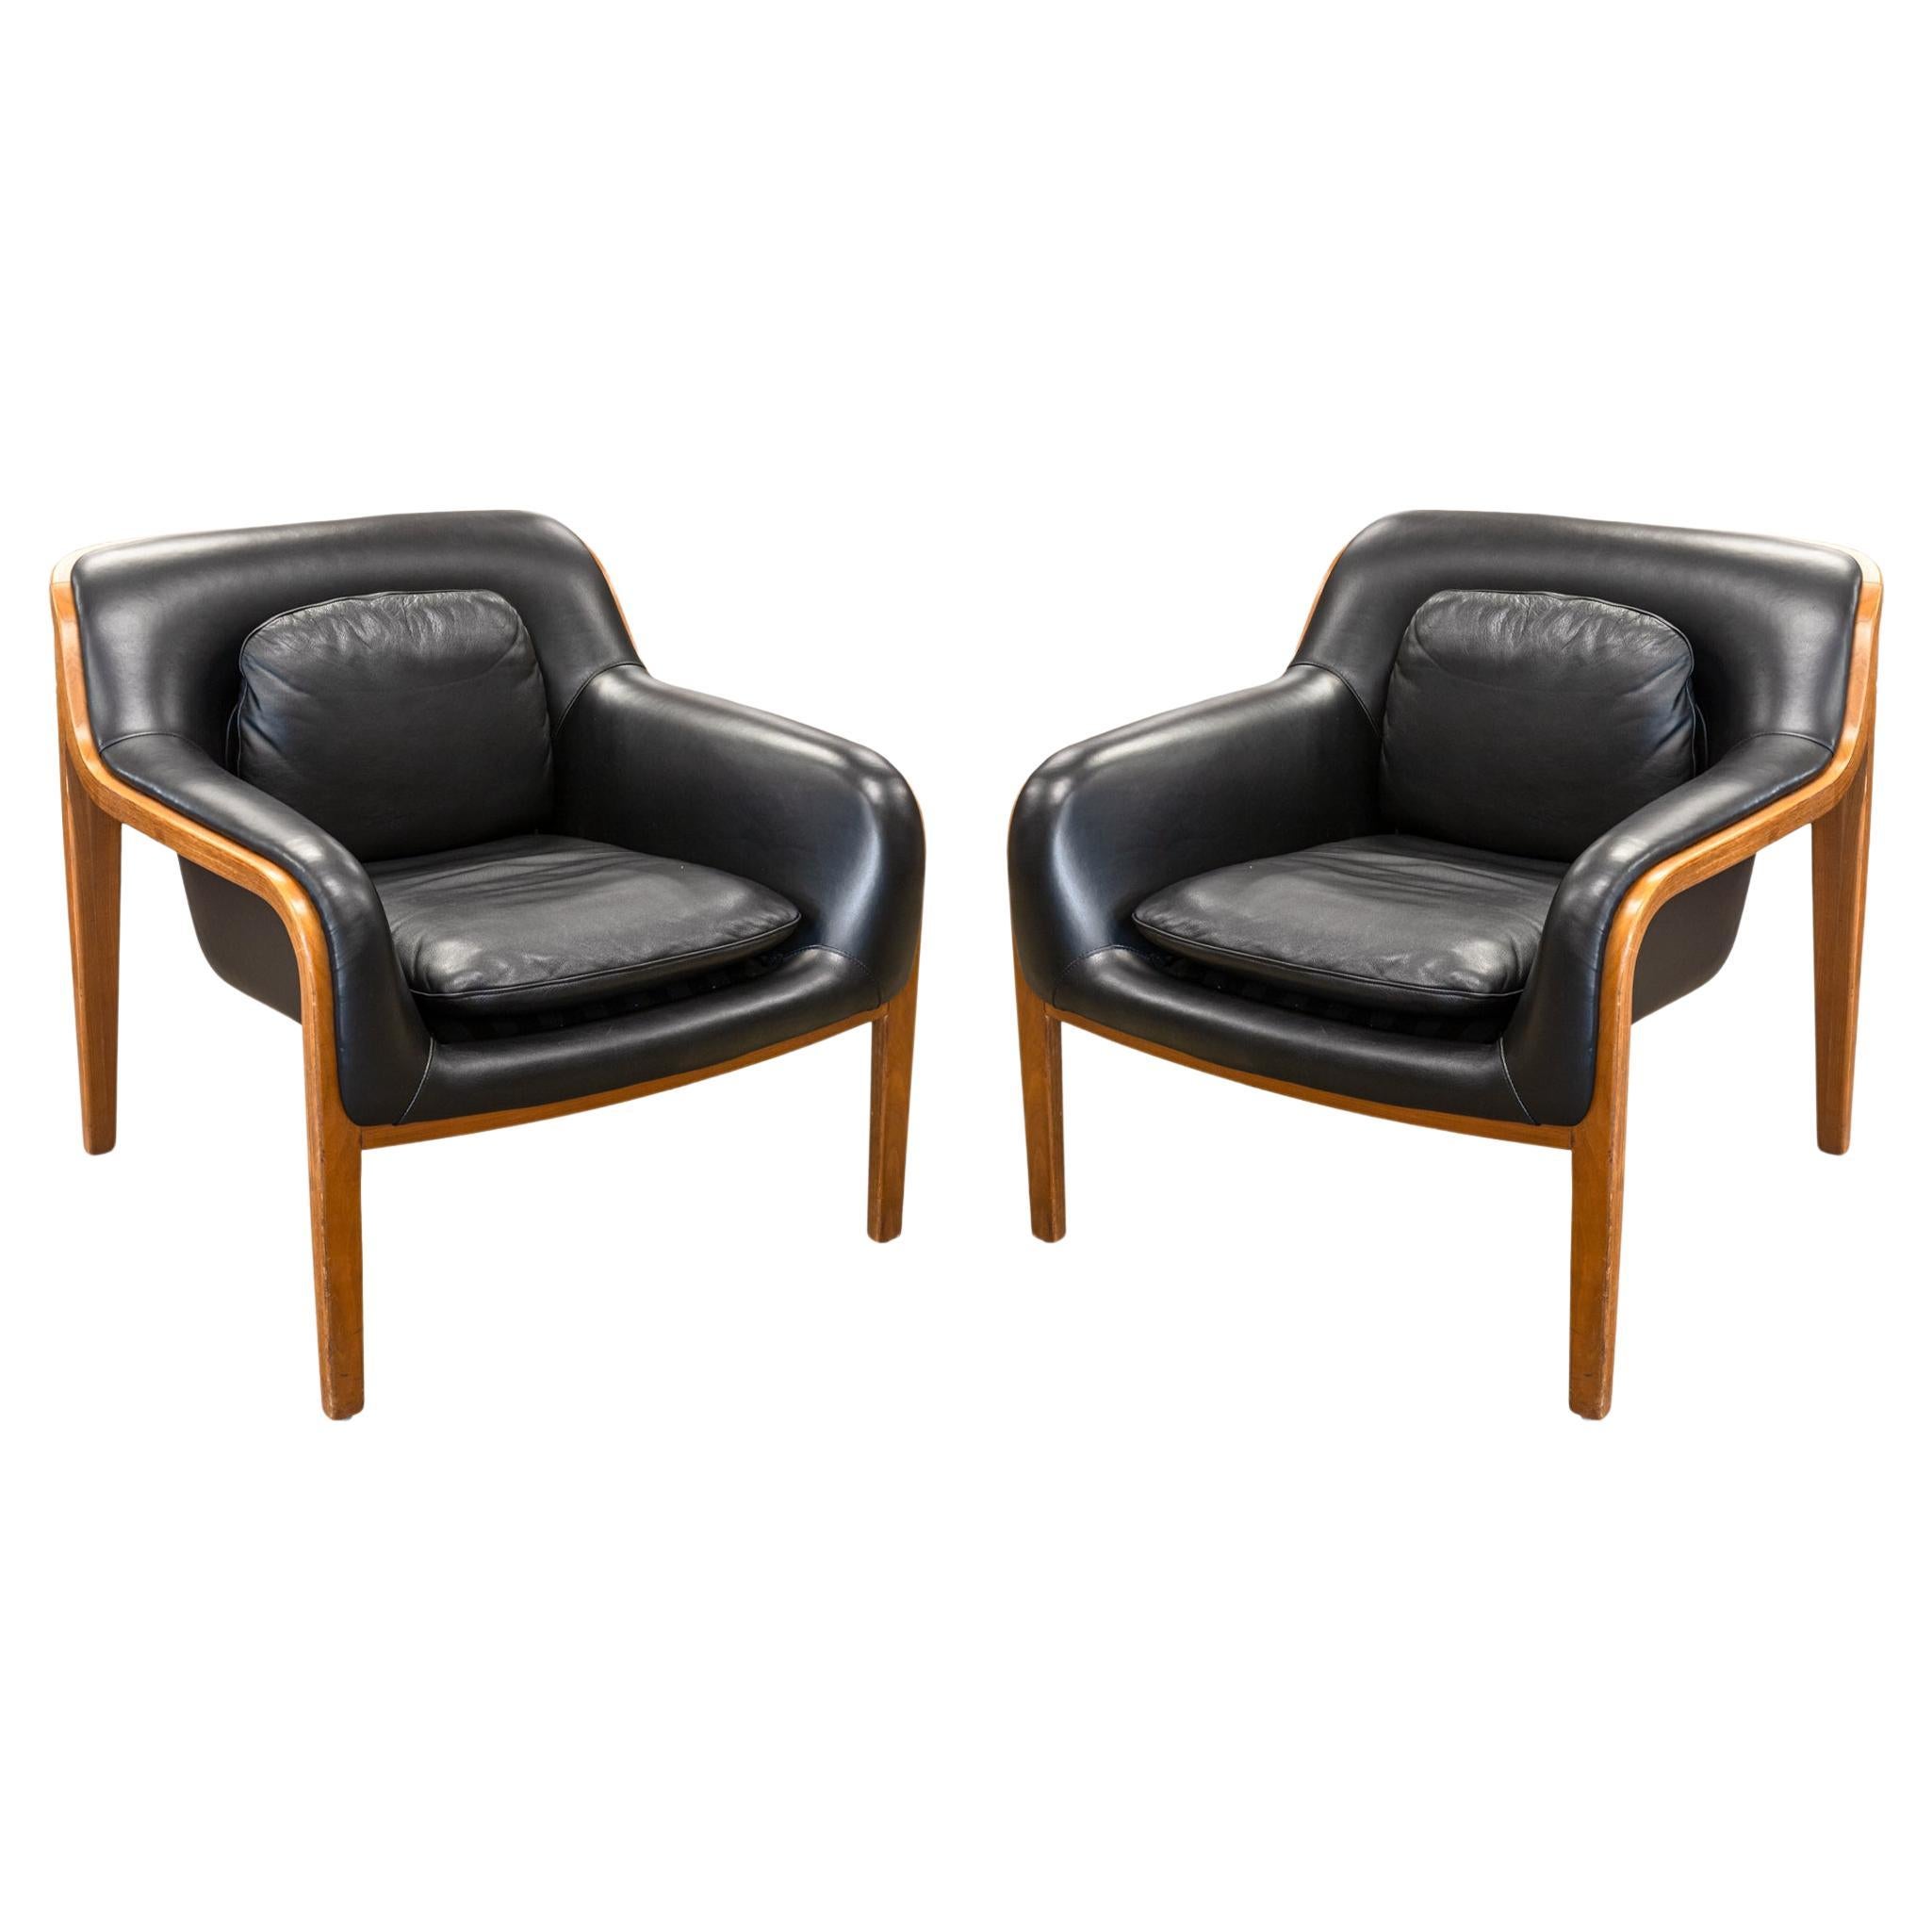 Pair of Bill Stephens for Knoll Black Leather and Wood Mid Century Armchairs